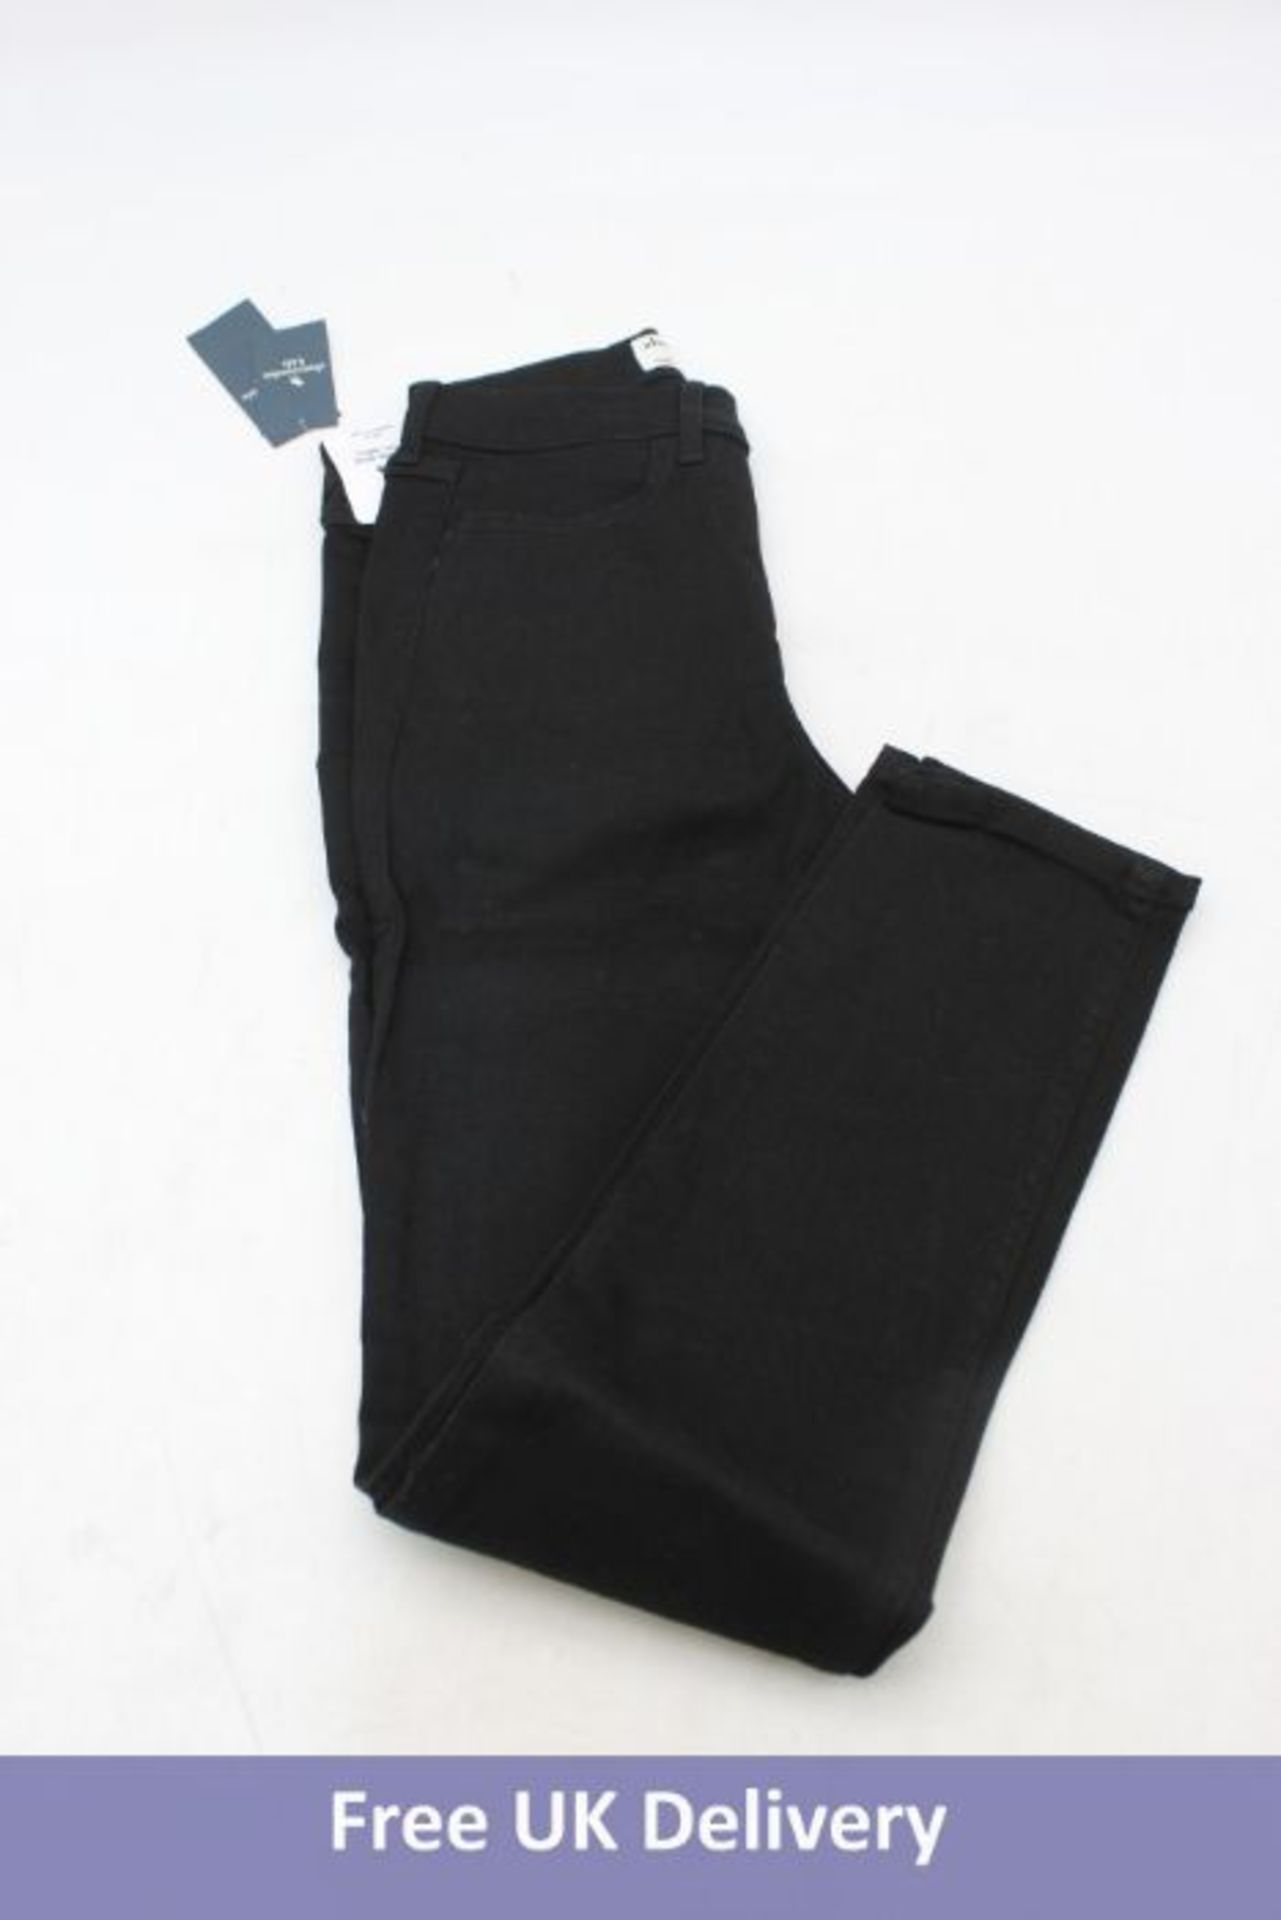 Five Abercrombie & Fitch items to include 1x Kid's Slim High-rise Jeggings, Black, Size 11/12 yrs, 1